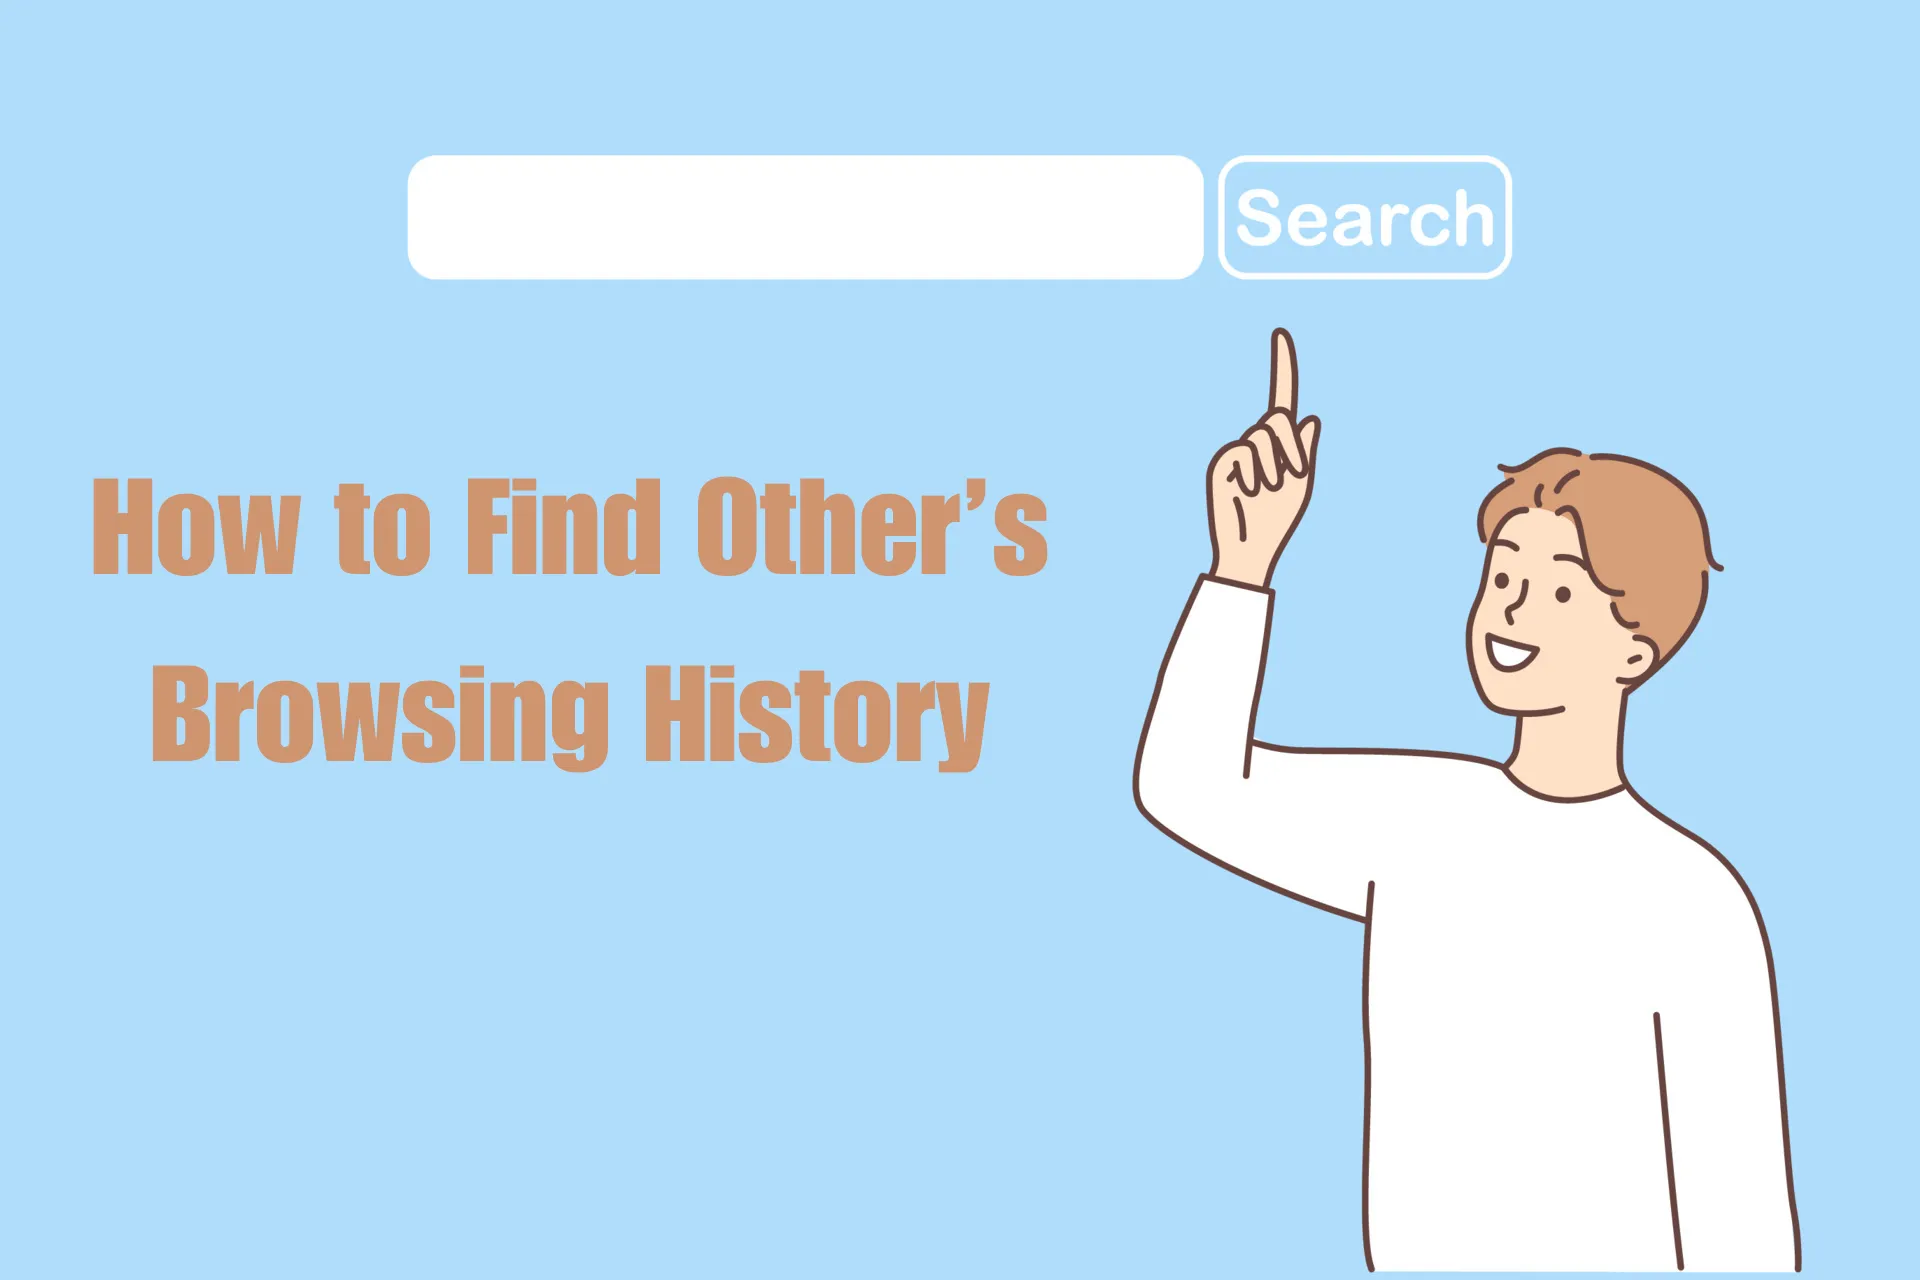 How to find other's browsing history